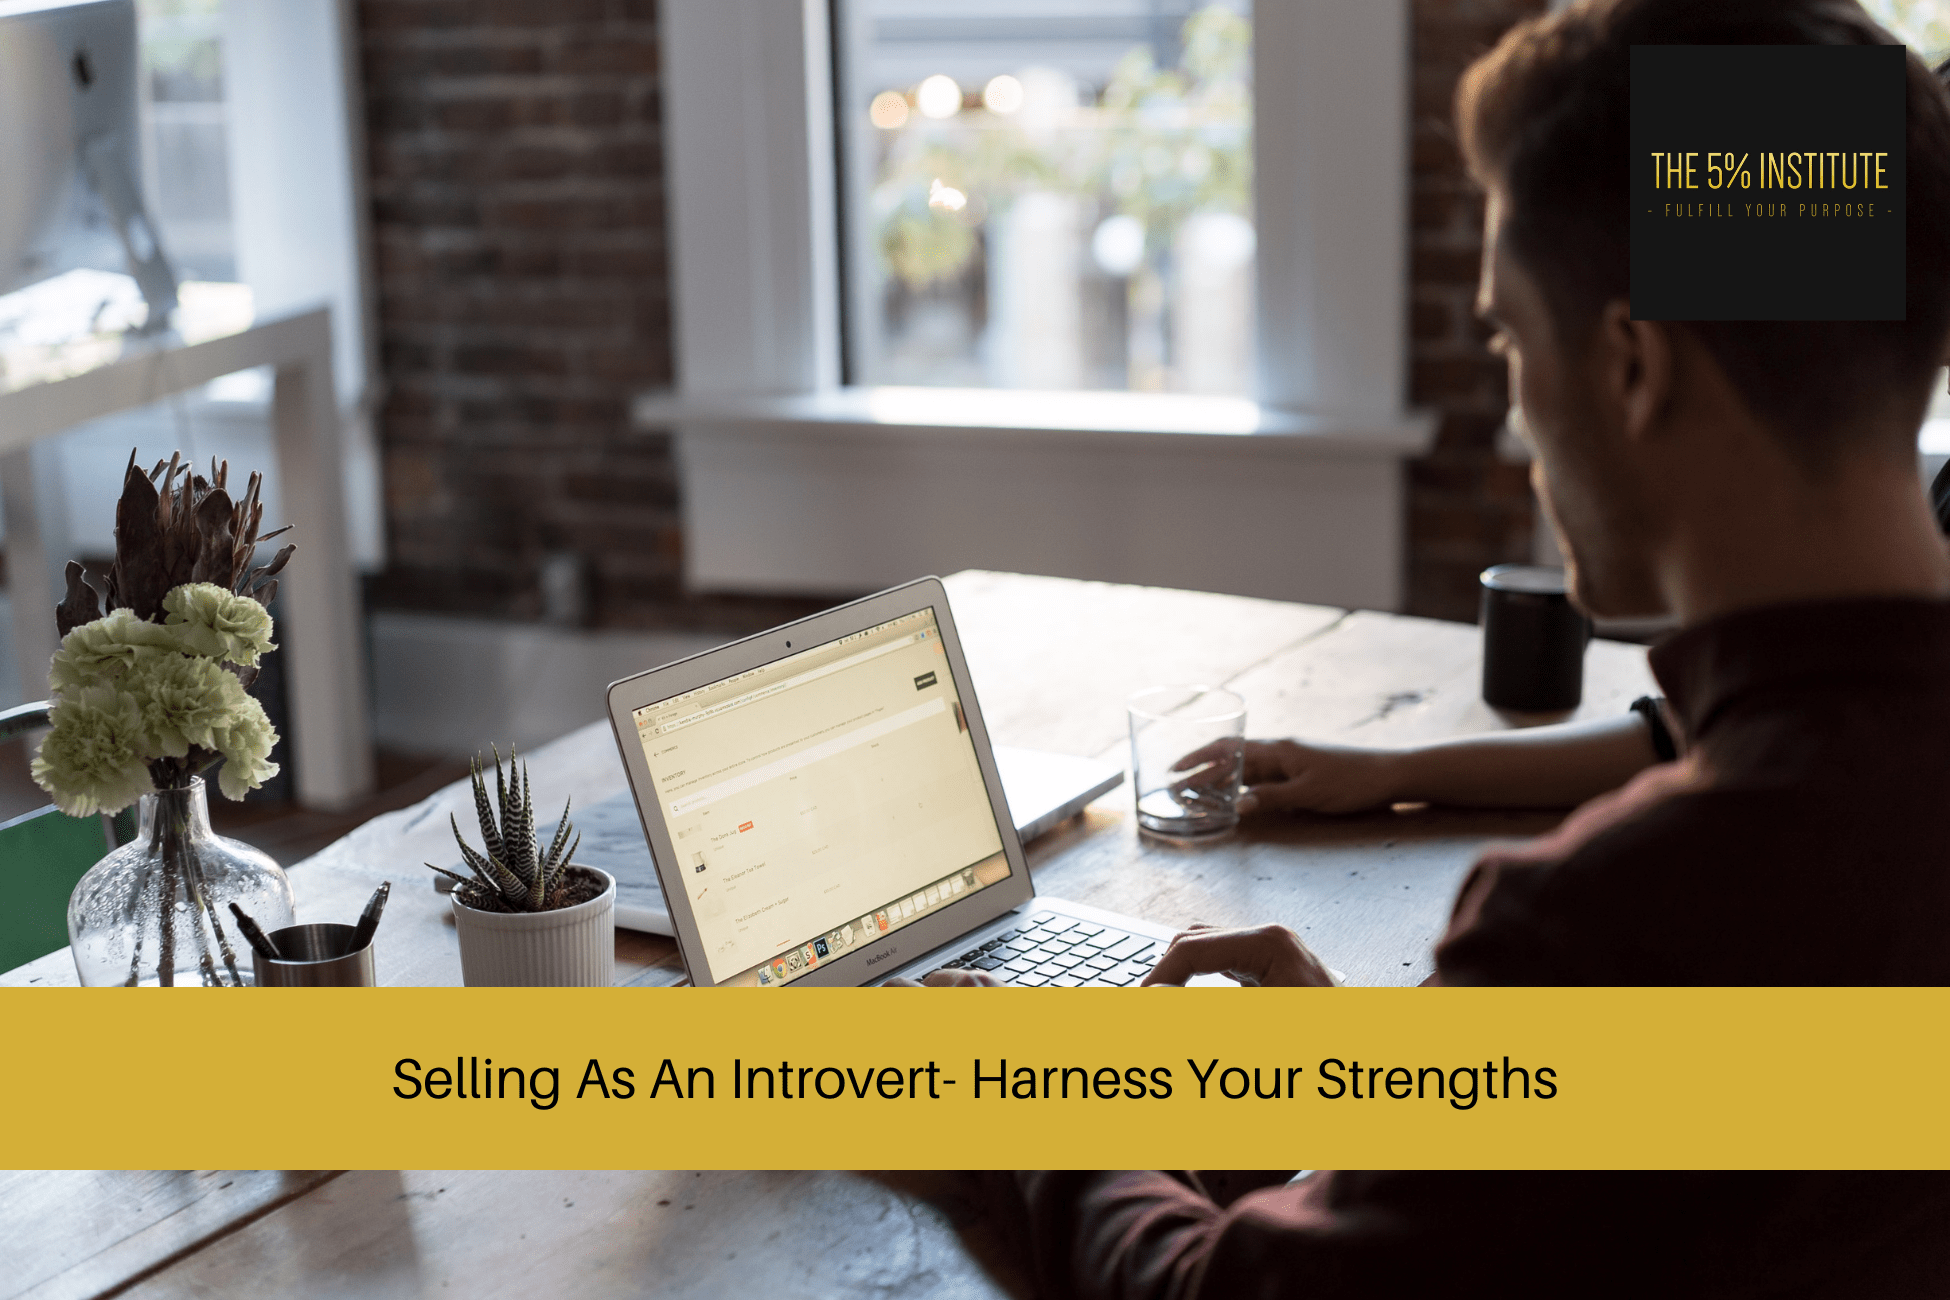 Selling As An Introvert- Harness Your Strengths